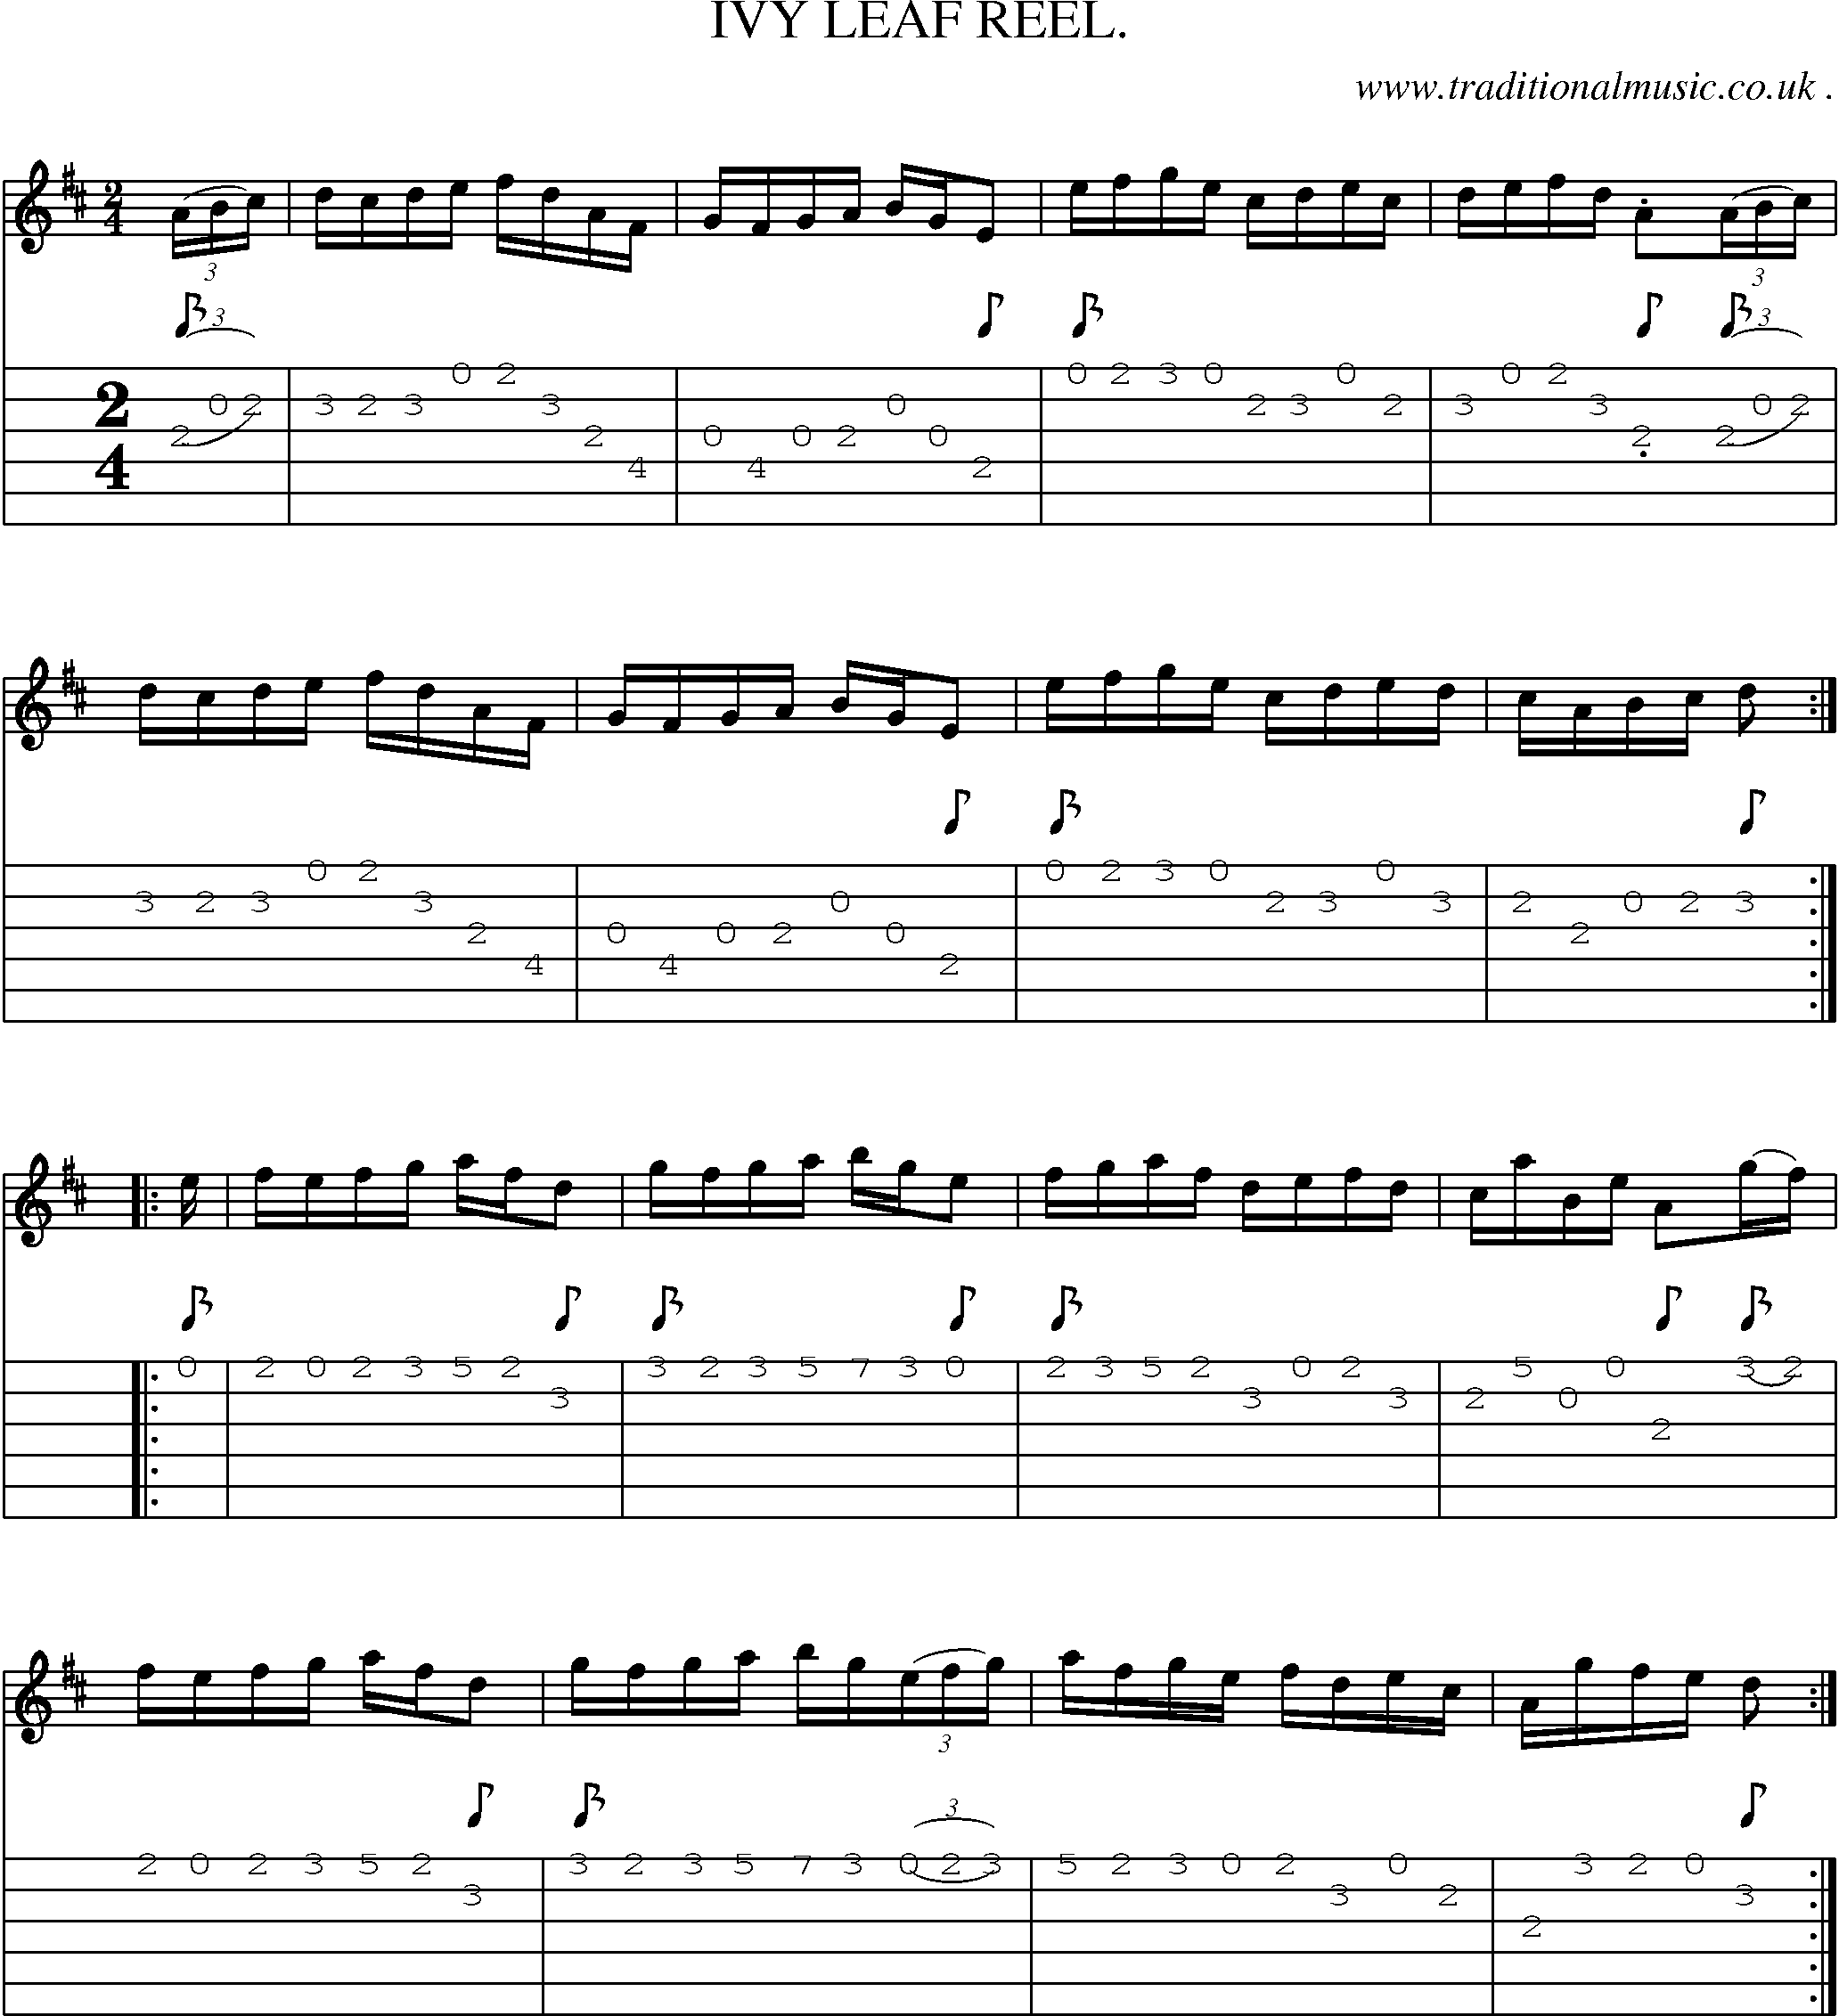 Sheet-Music and Guitar Tabs for Ivy Leaf Reel